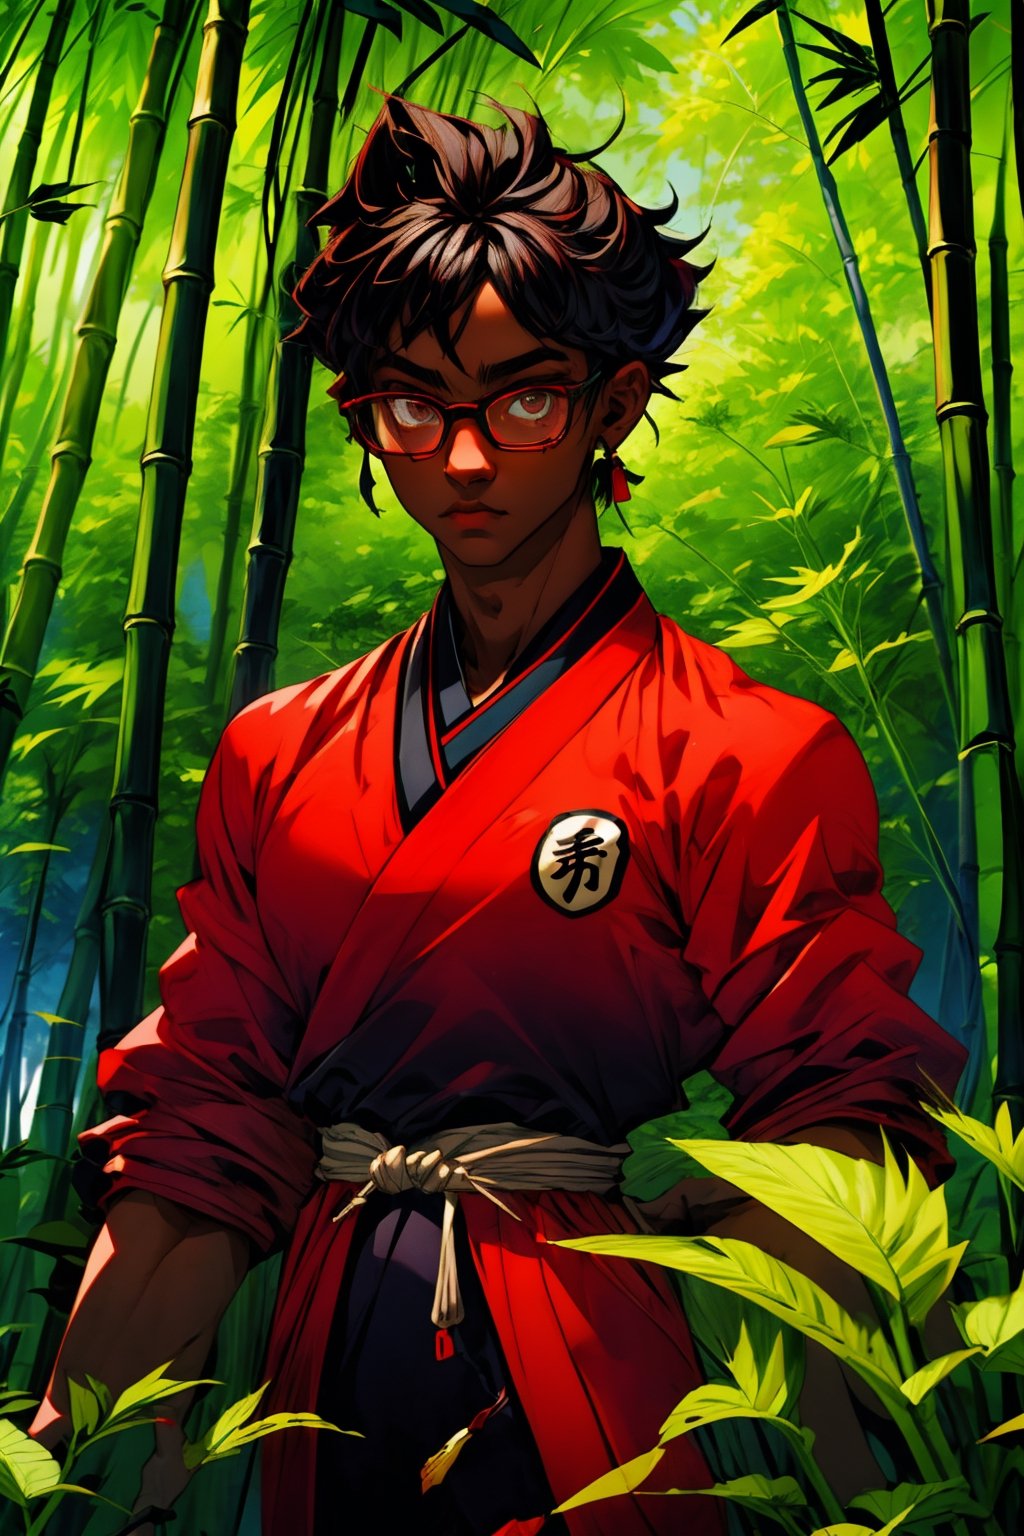 
Attractive man, tall, muscular, dark skin, black and short hair, good physique, wears glasses, with mostly red clothing (like a scholar uniforme). (médium long shot). With a kyoto bamboo forest as a background, High resolution.
